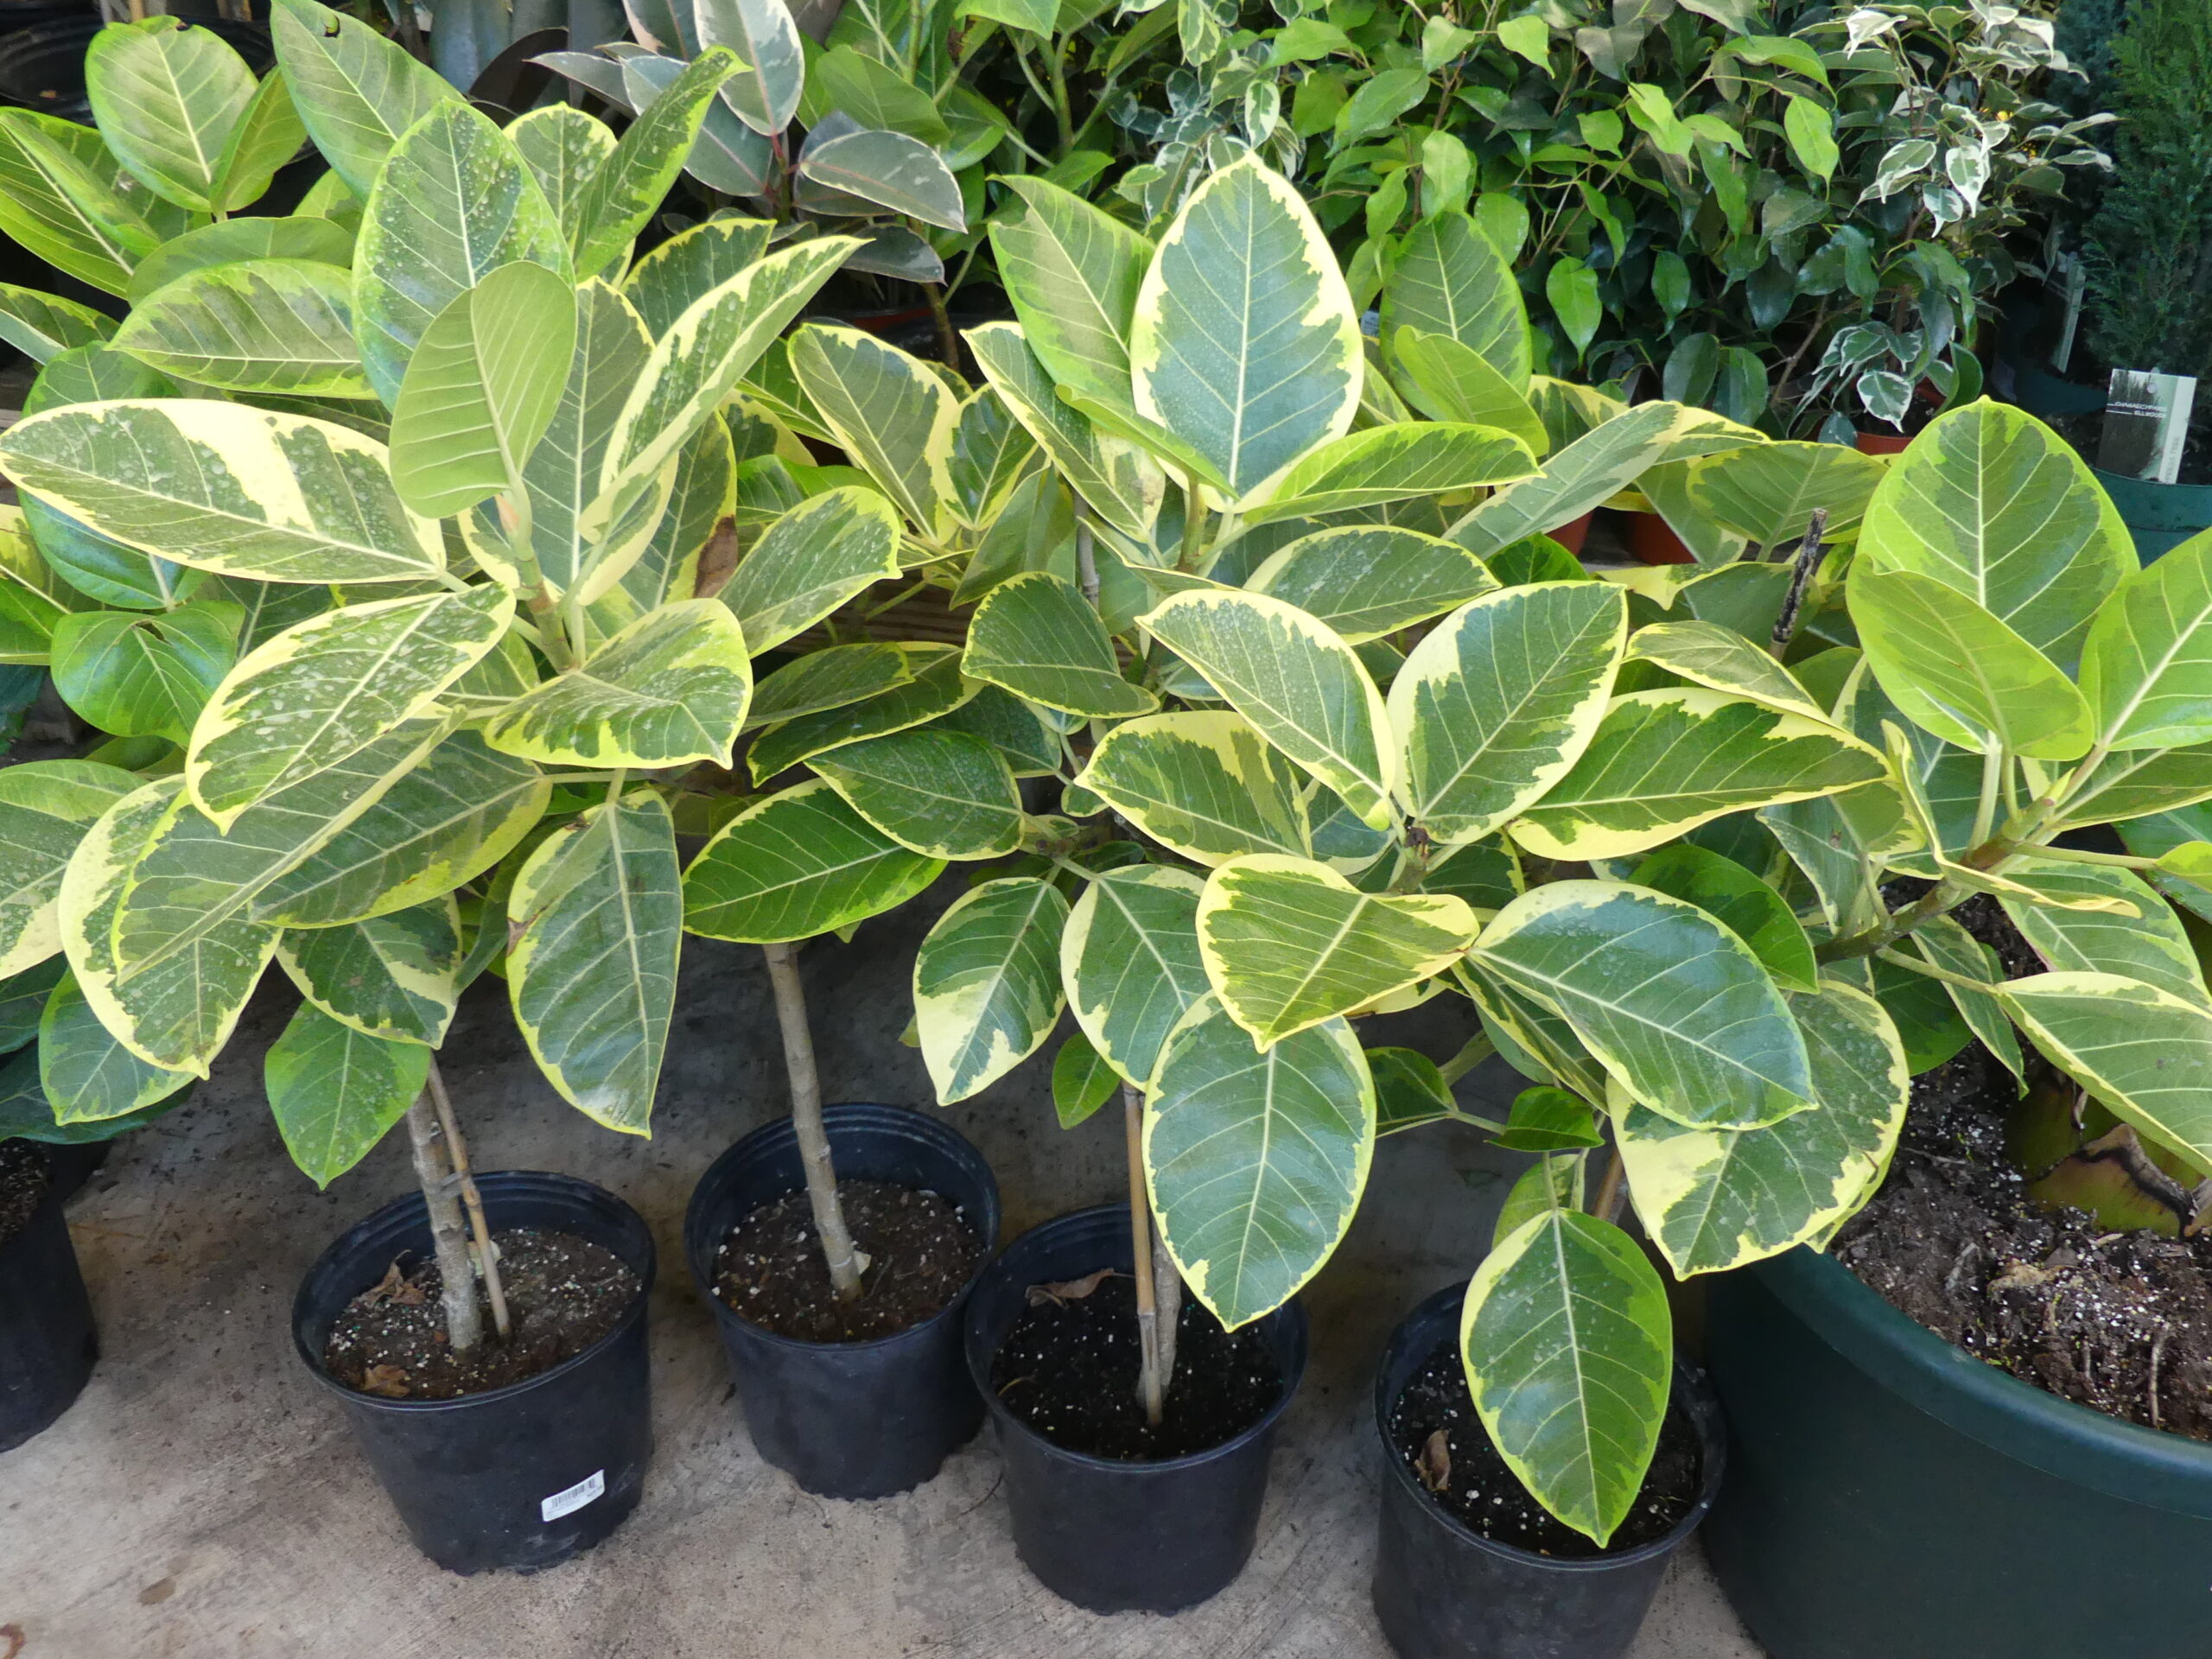 A variegated Ficus decora or rubber tree. White in the foliage is dependent on good lighting while the darker colored varieties do much better in lower light. Available as standards (single stems) or with multiple stems on one pot. These to get tall. ANDREW MESSINGER